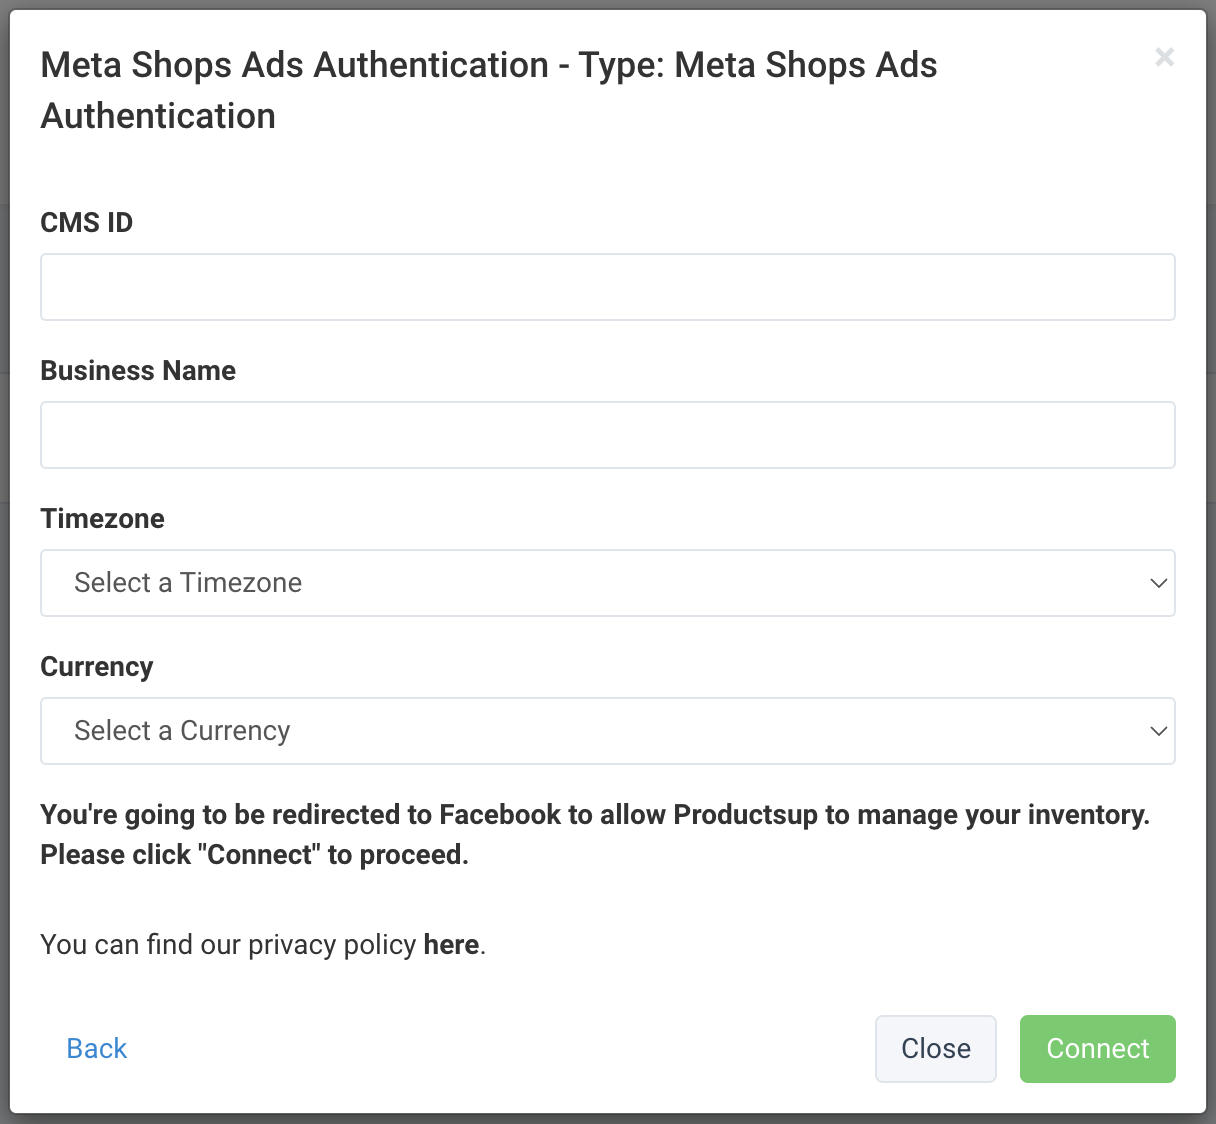 Add the Meta Shops Ads Authentication